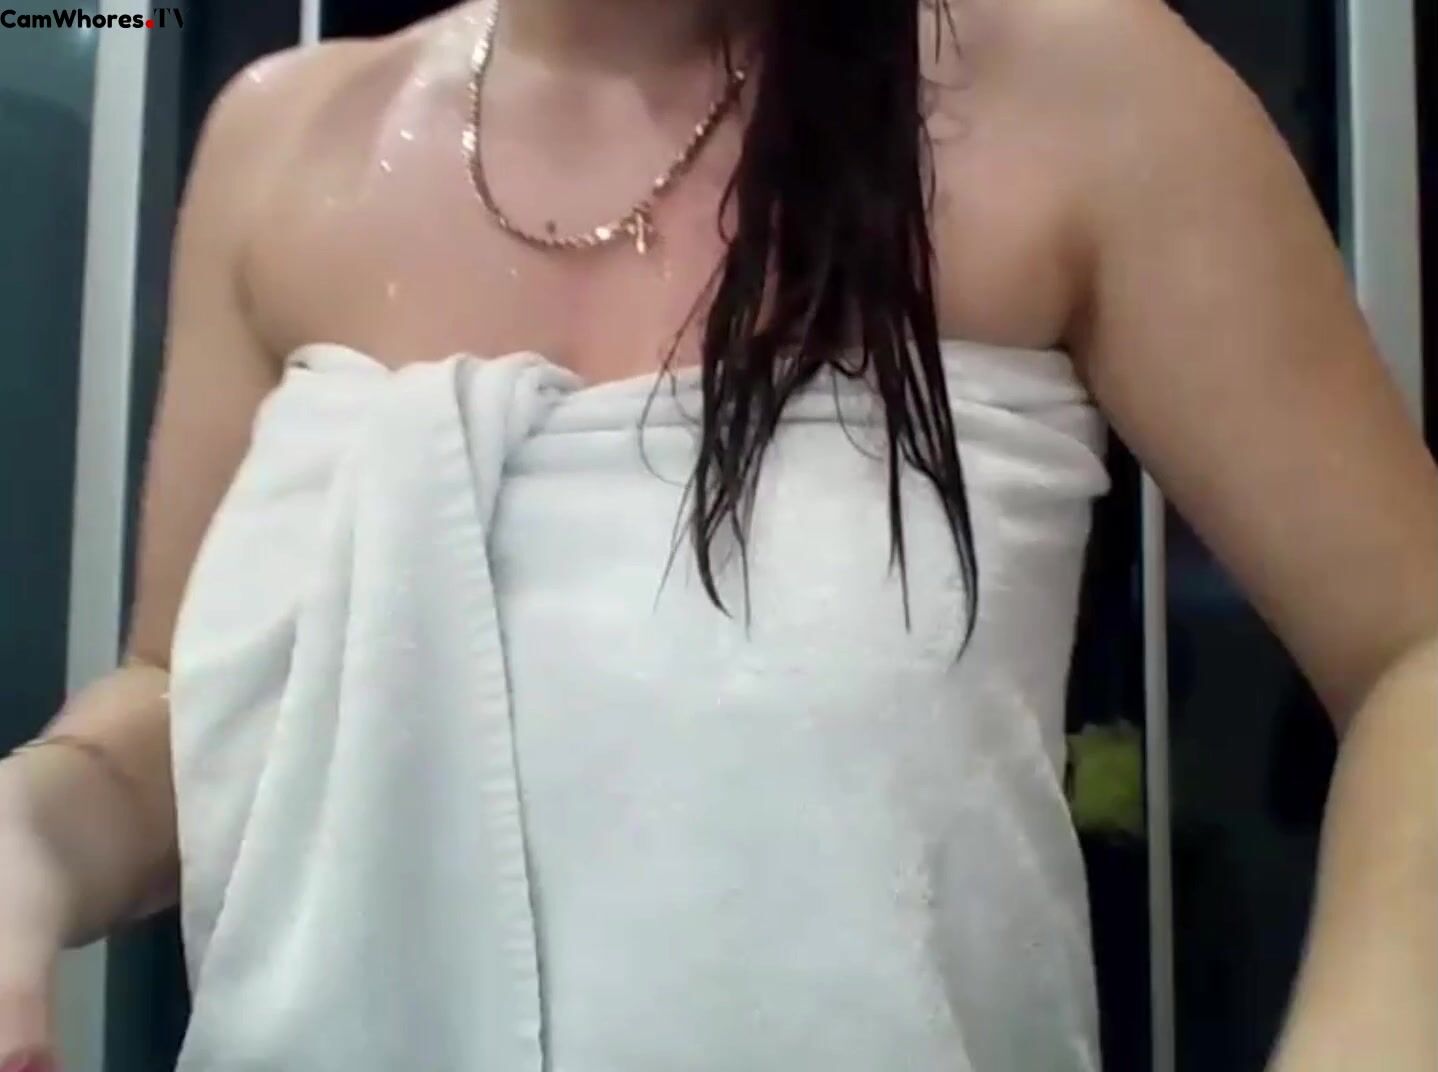 Yourfantasies15 soapy shower 2019